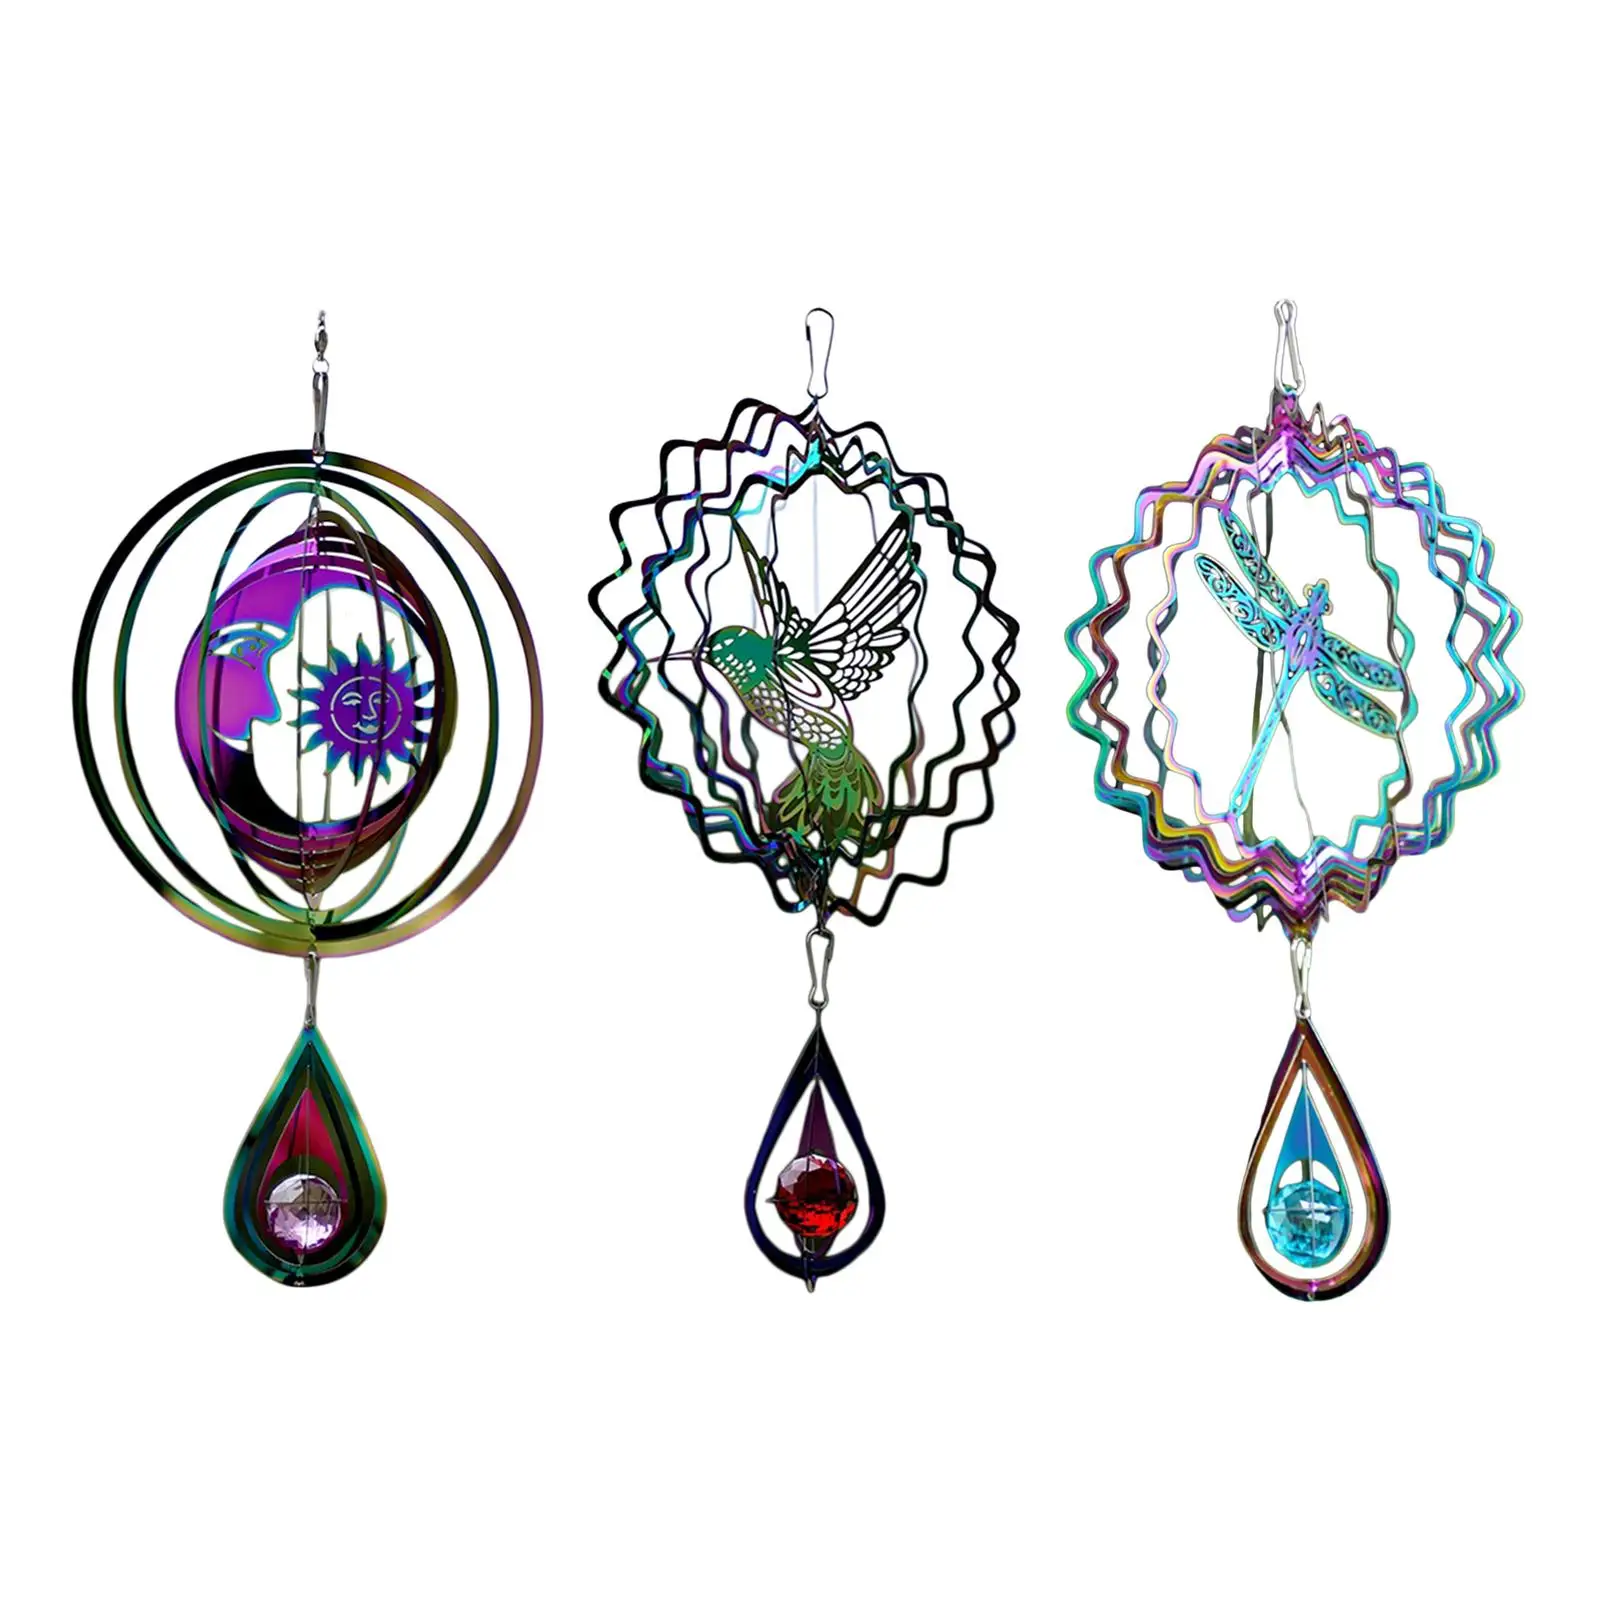 Wind Spinner Garden Decorative Windchime Weatherproof Wind Chime Wind Sculpture Hanging for Farm Yard Porch Living Room Outside